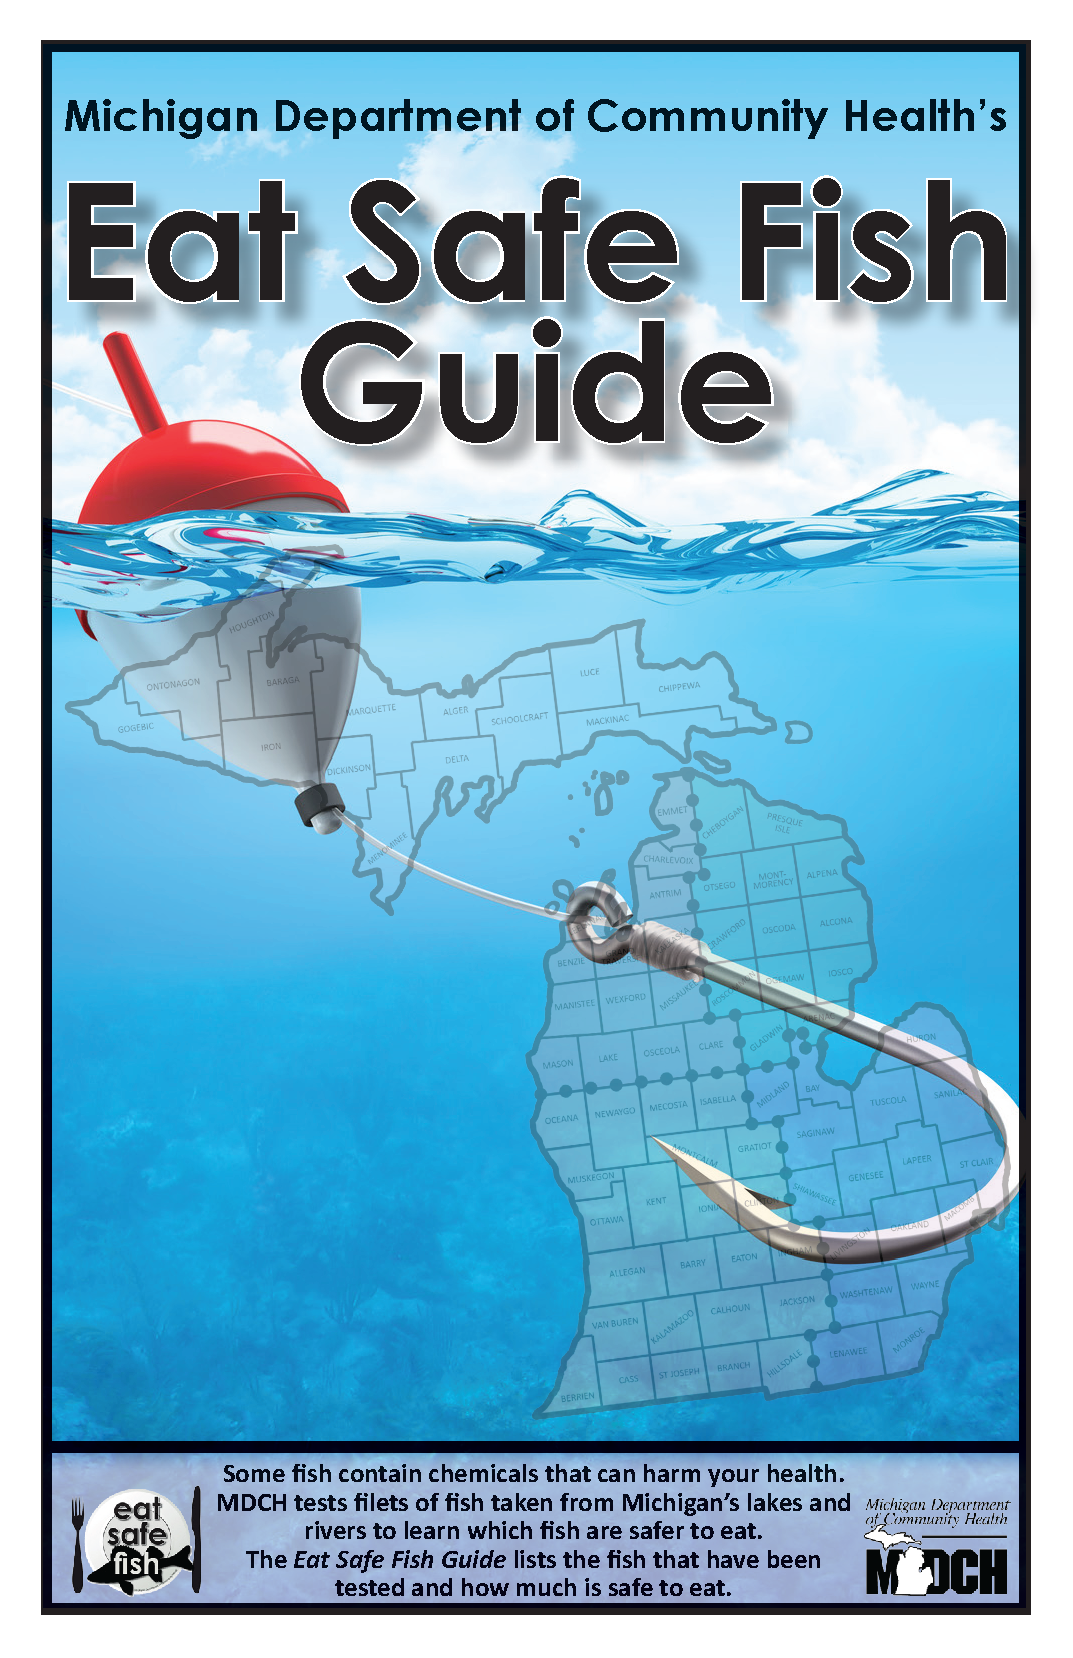 Michigan's Eat Safe Fish Guide advises Michiganders on what species of fish, and from where they are caught, are safe to eat. Image: Michigan Department of Community Health.